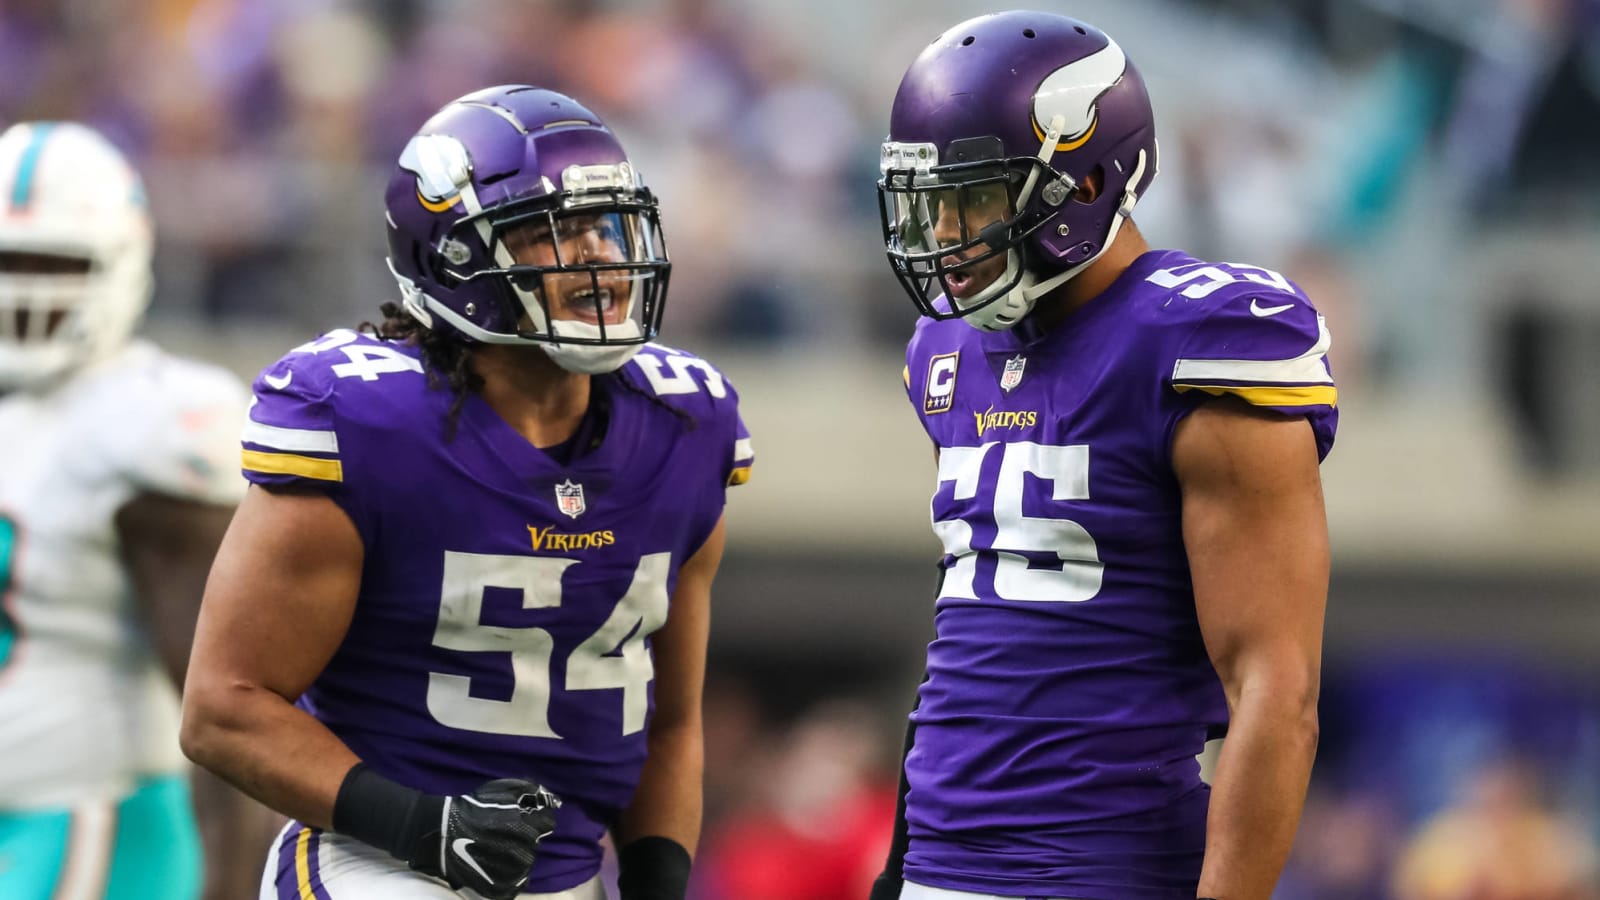 Vikings' Eric Kendricks, Anthony Barr to NFL: 'Your statement said nothing'